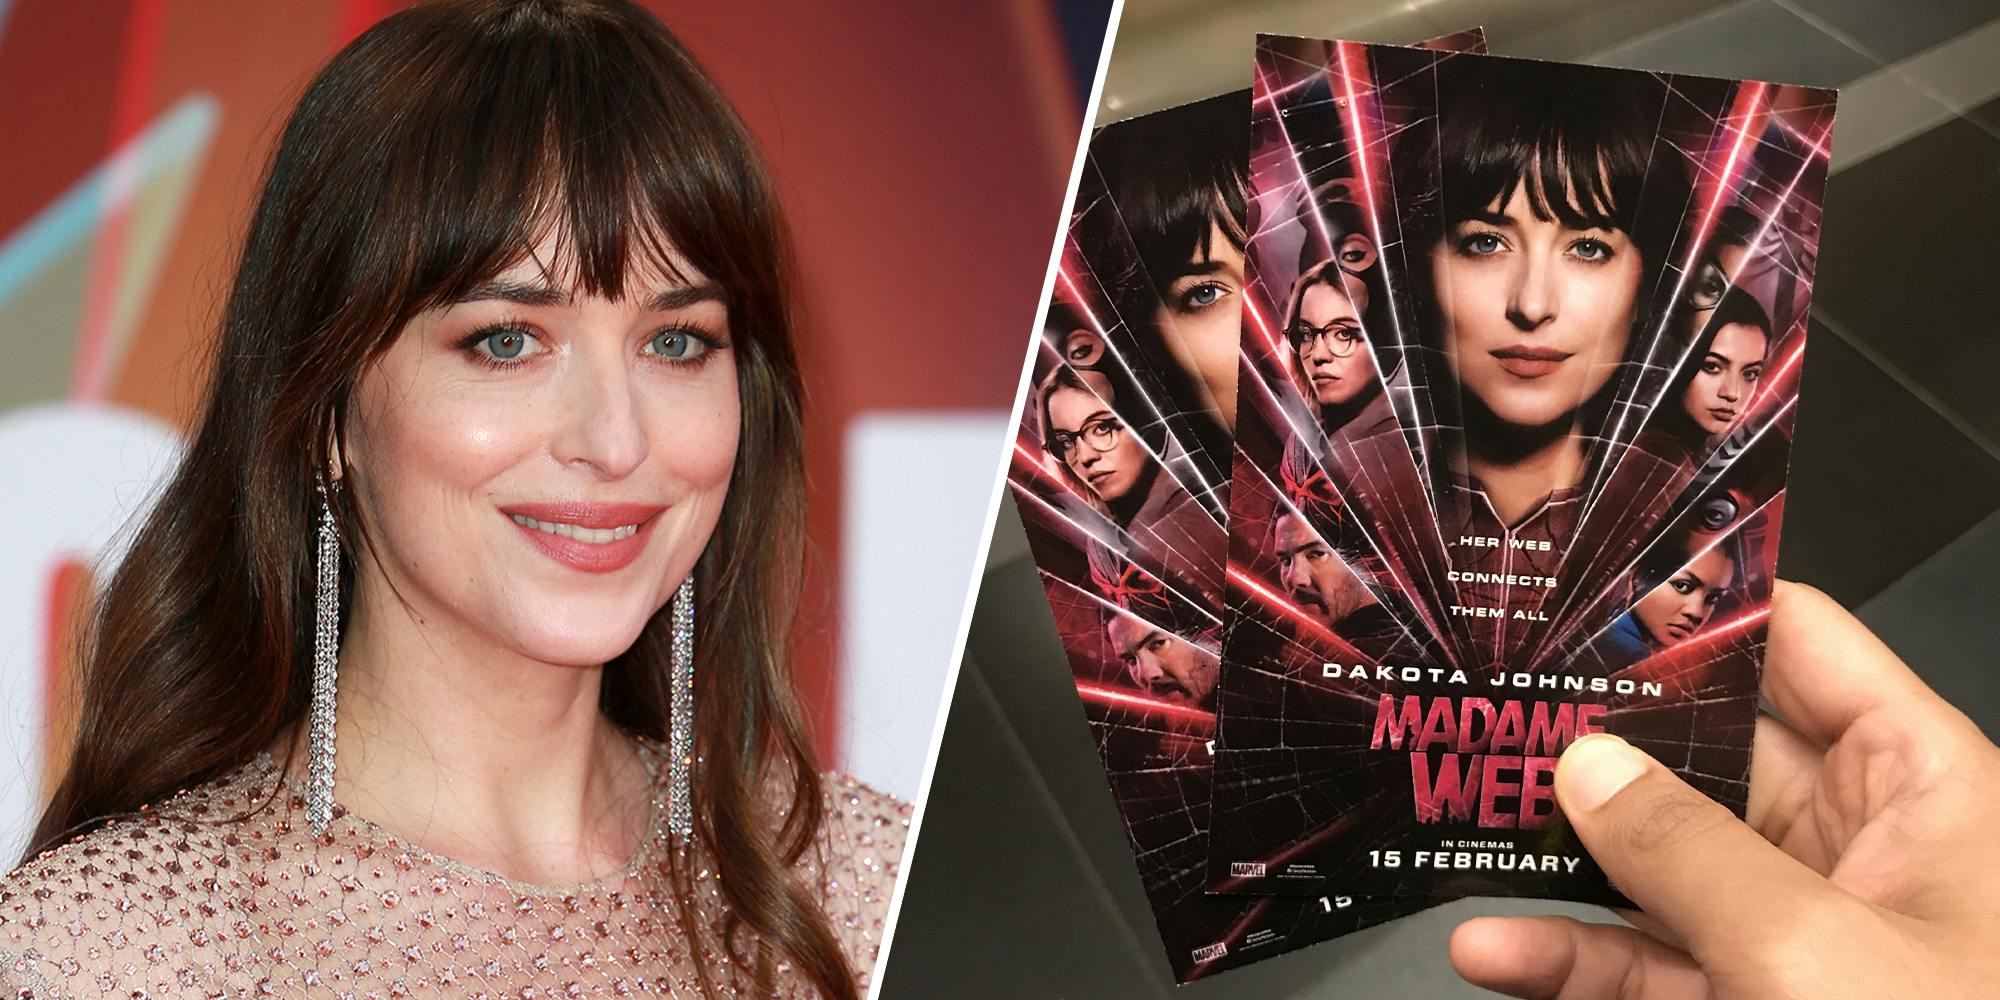 People think Dakota Johnson’s agent lied to her about what type of movie Madame Web was going to be